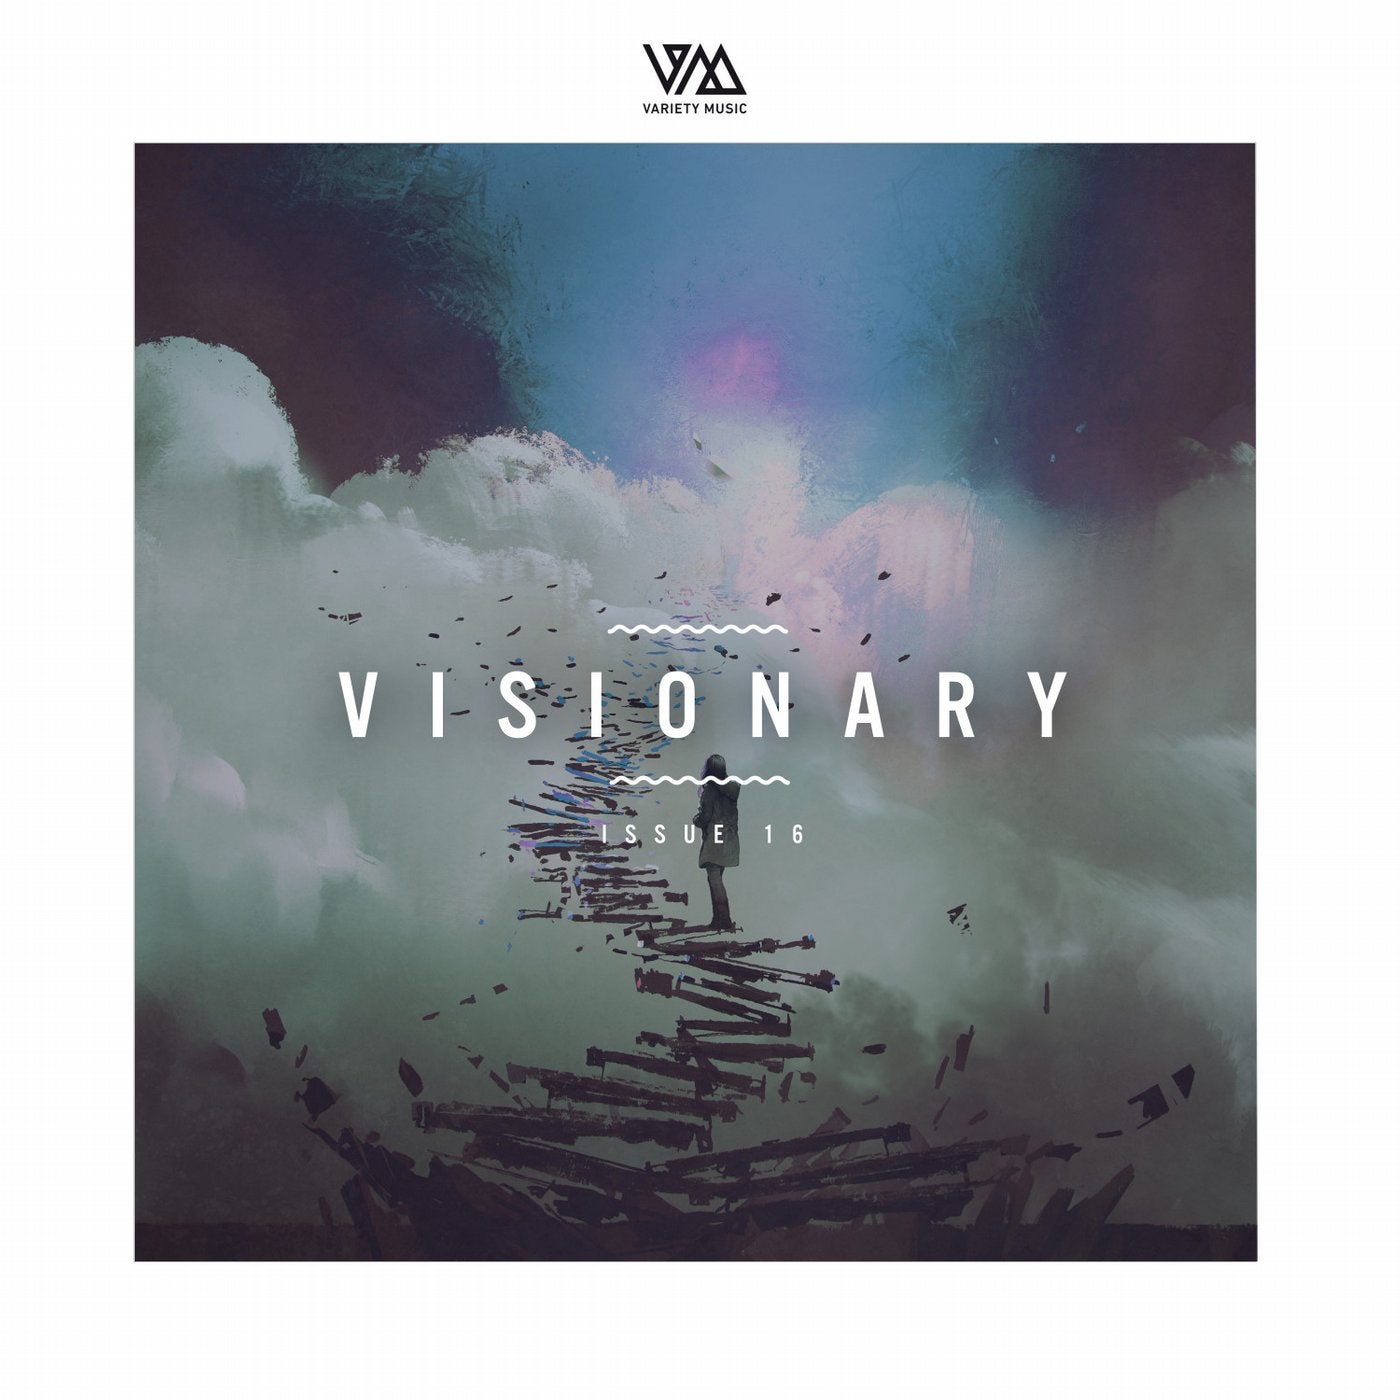 Variety Music pres. Visionary Issue 16